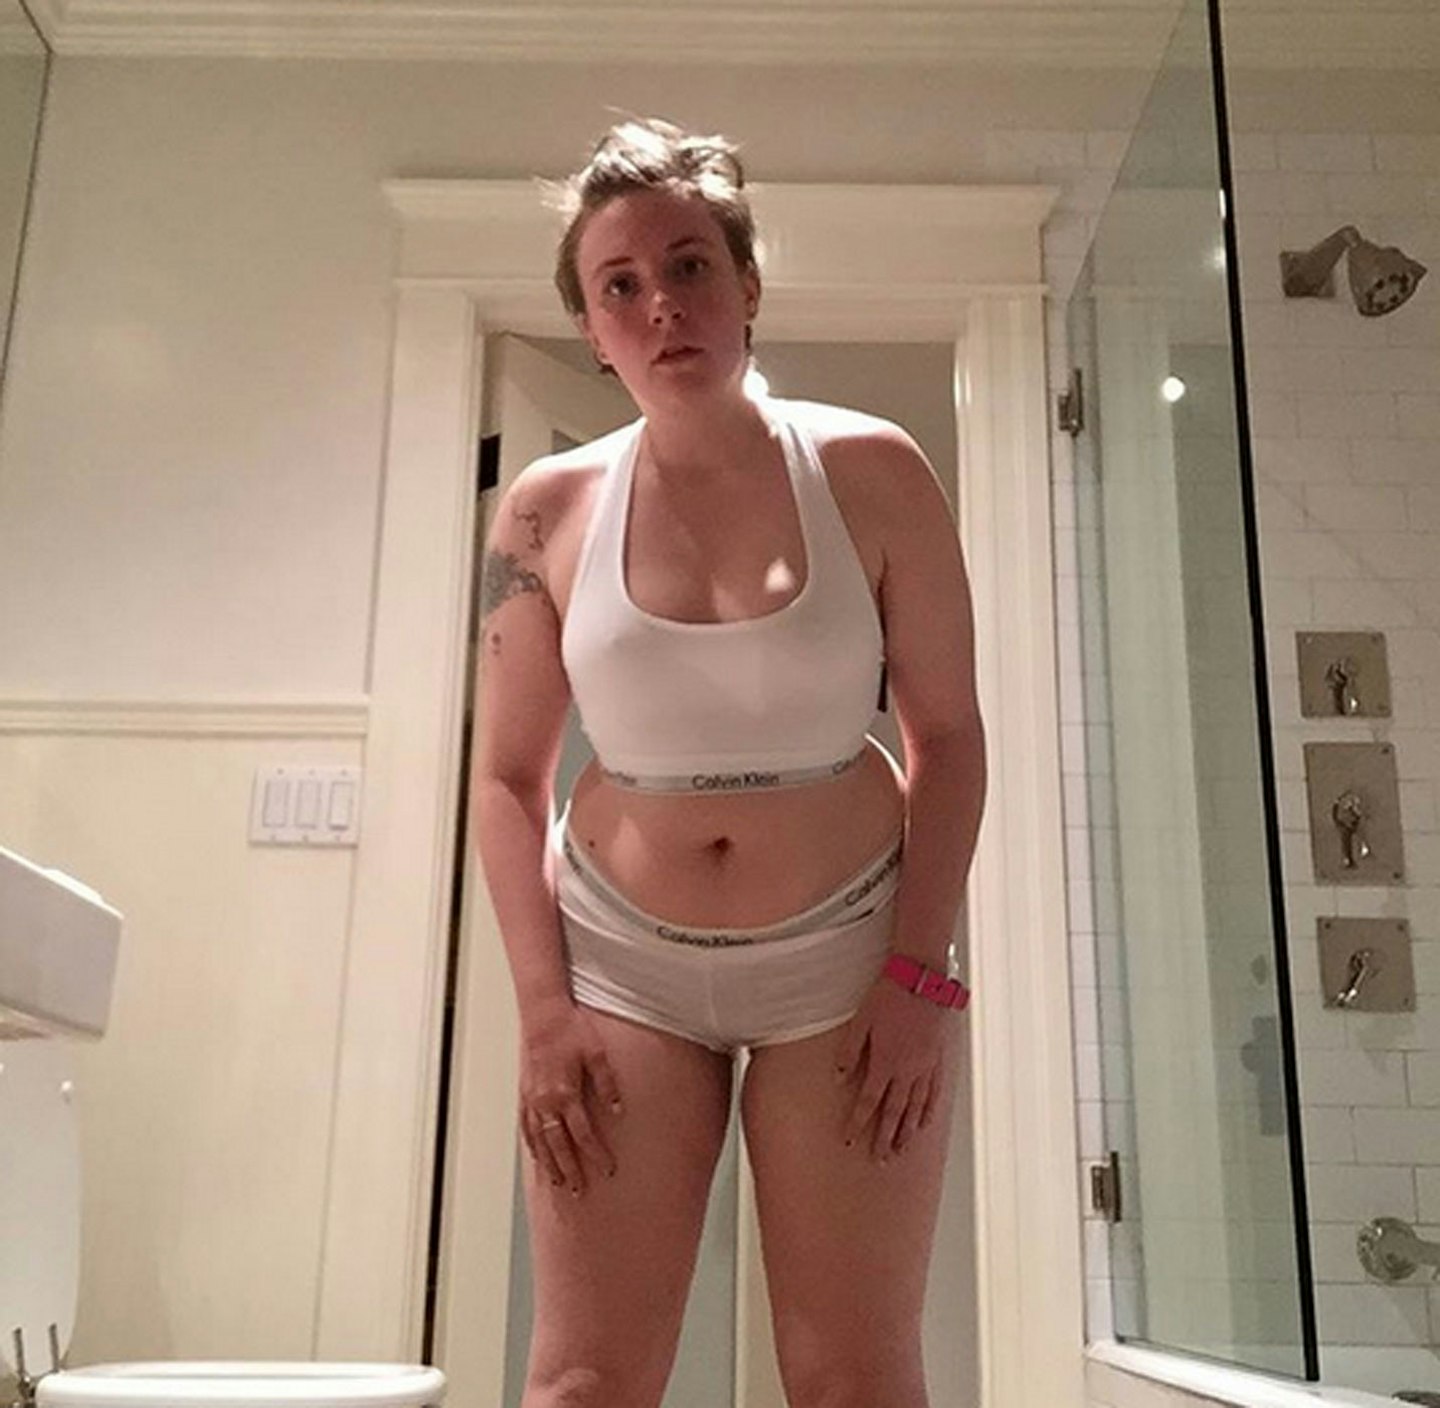 Lena Dunham spoke out about the comments she received on this picture [Instagram]